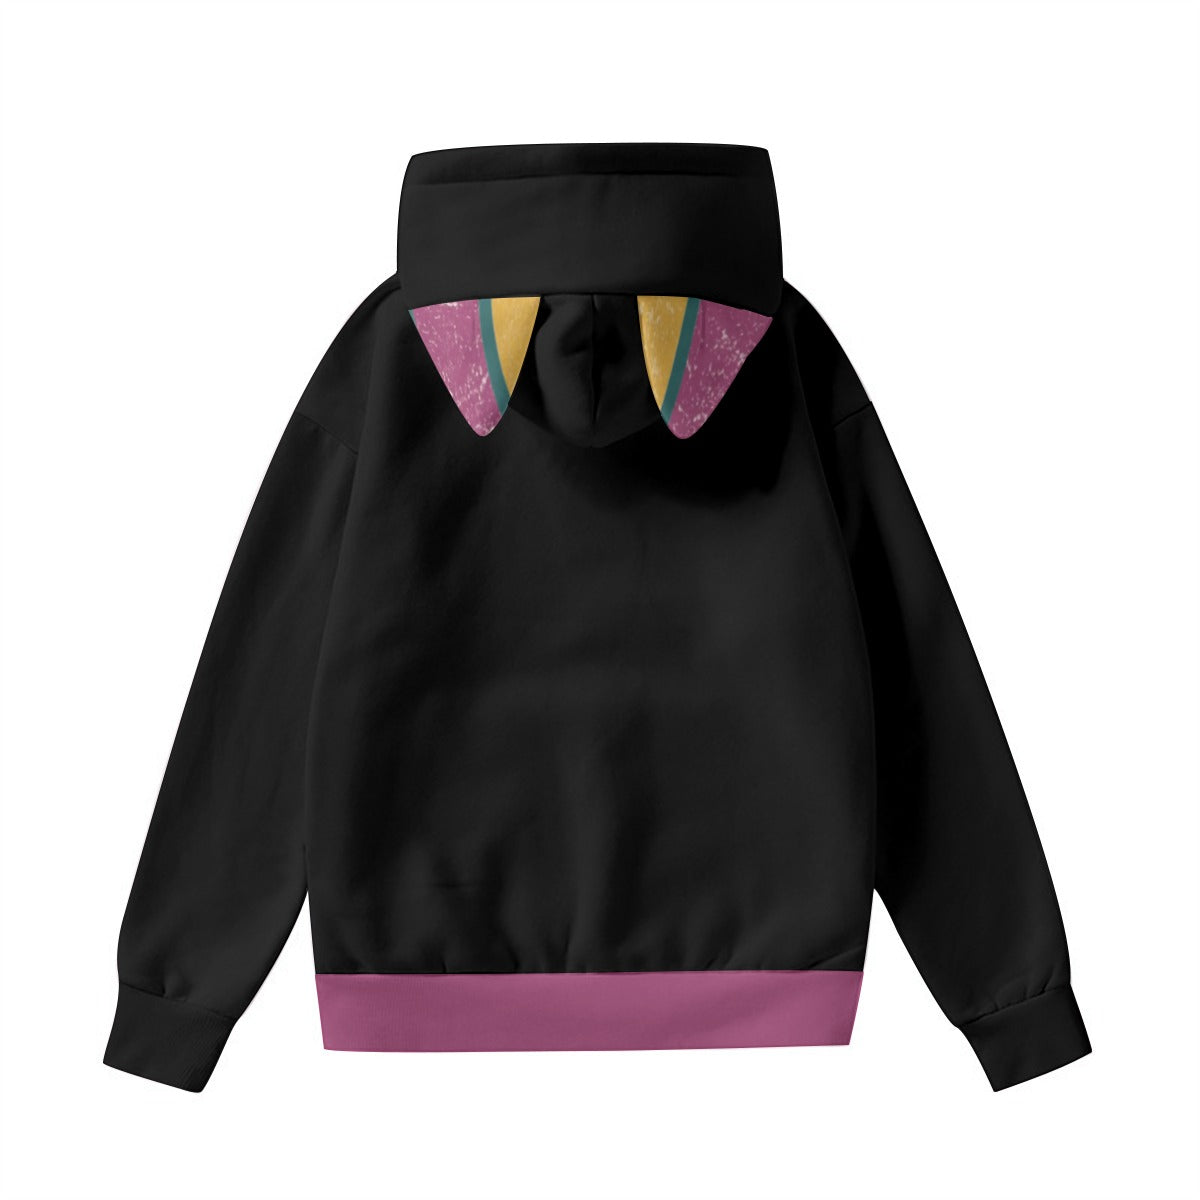 Good Vibes Magenta - Women’s Hoodie With Decorative Ears